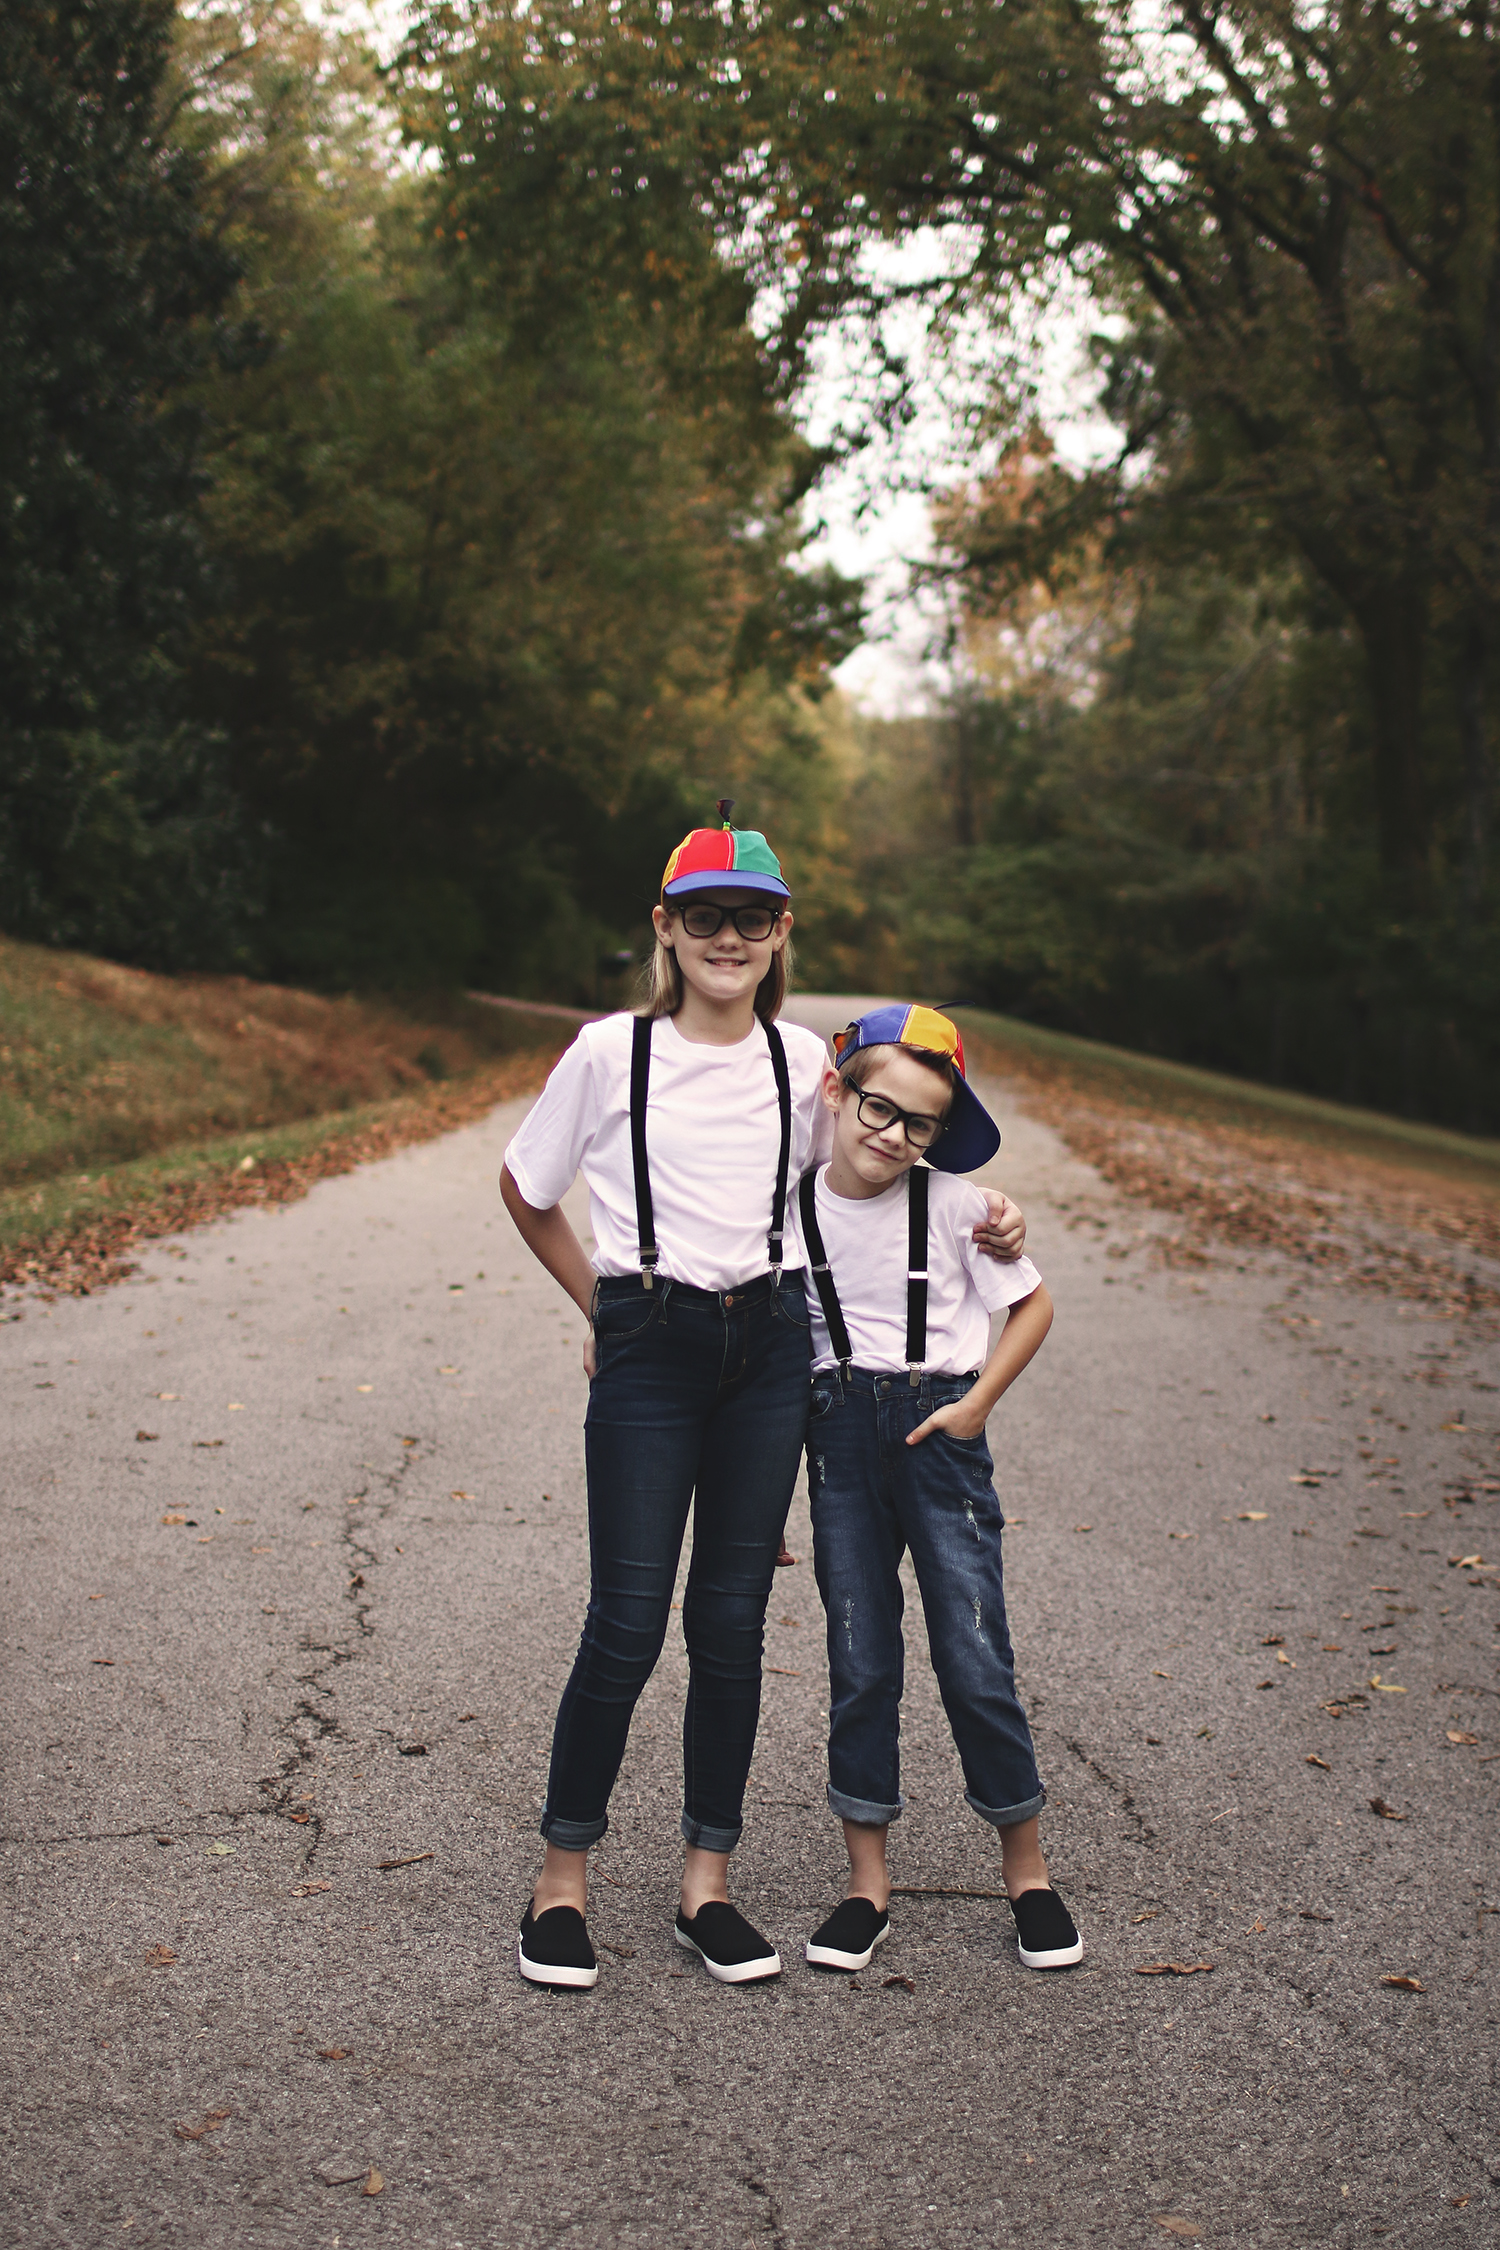 Happy Halloween from our home to yours! Friends, the years are going by too fast and I am just trying to soak every moment in as long as I can... #HappyHalloween #HalloweenPortraits #HalloweenKidsCostumes #FamilyMemories #ProjectLife #MemoryKeeping